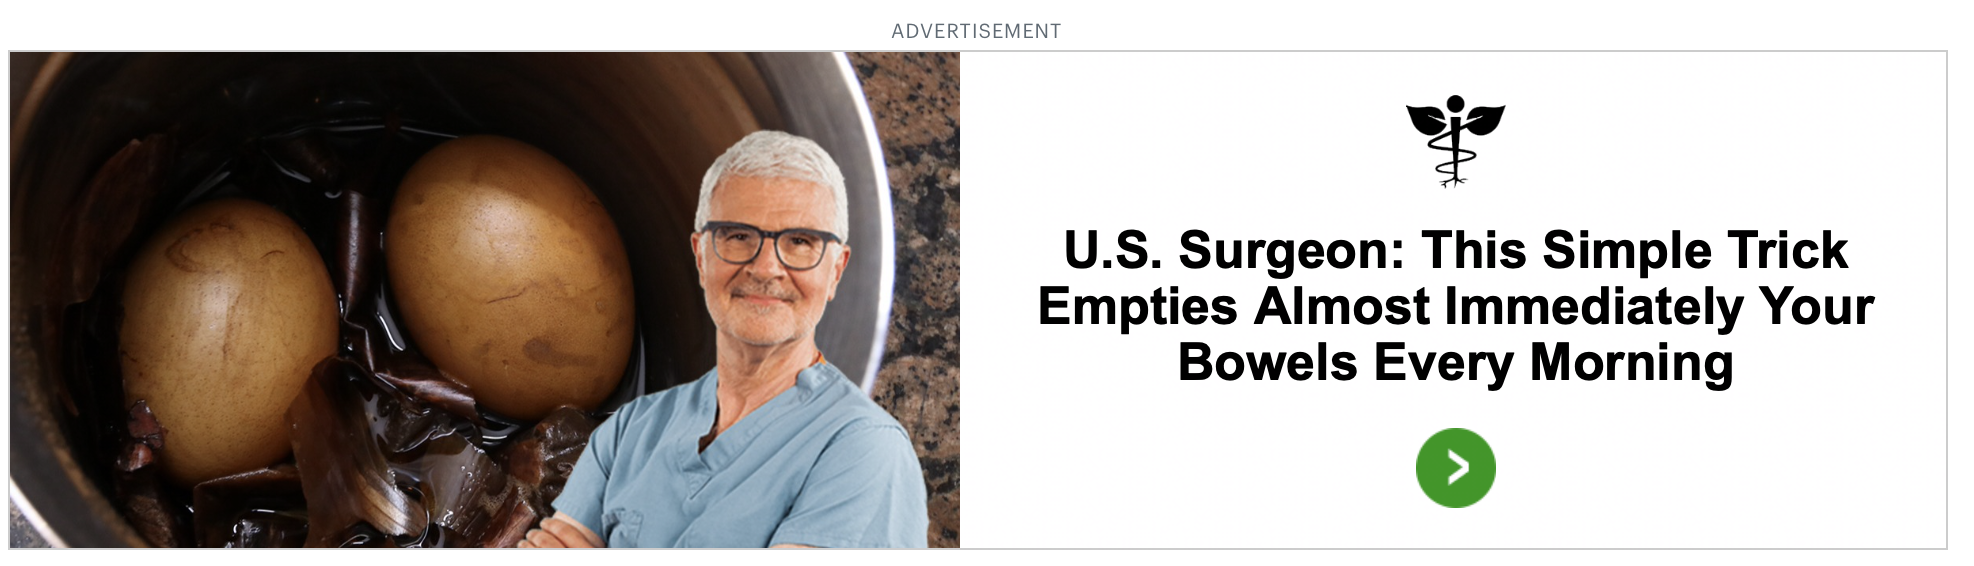 ADVERTISEMENT

U.S. Surgeon: This Simple Trick

Empties Almost Immediately Your
Bowels Every Morning